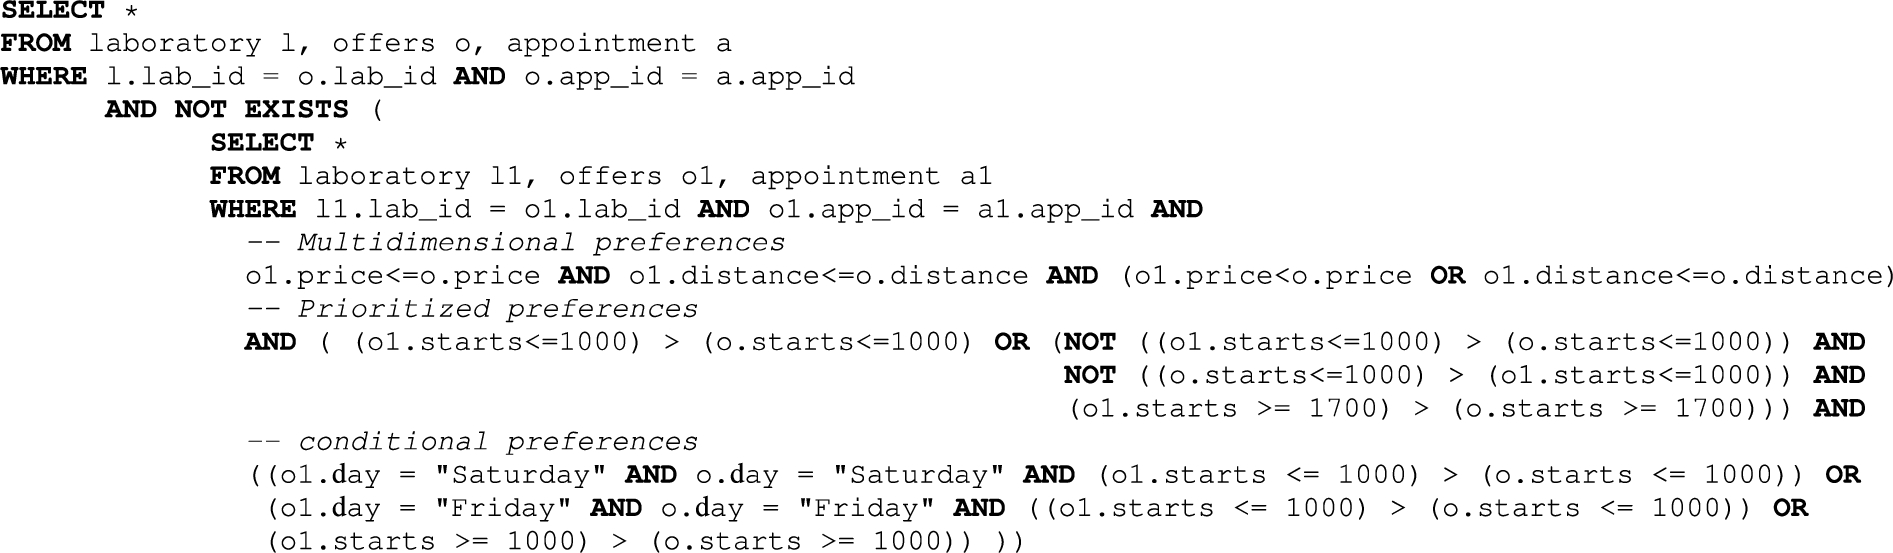 A sample SQL translated qualitative preference query for booking a PCR appointment. The query identifies cheaper and closer laboratories with earlier appointments before 10:00 or after 17:00 on Friday or Saturday by means of a nested SQL query.